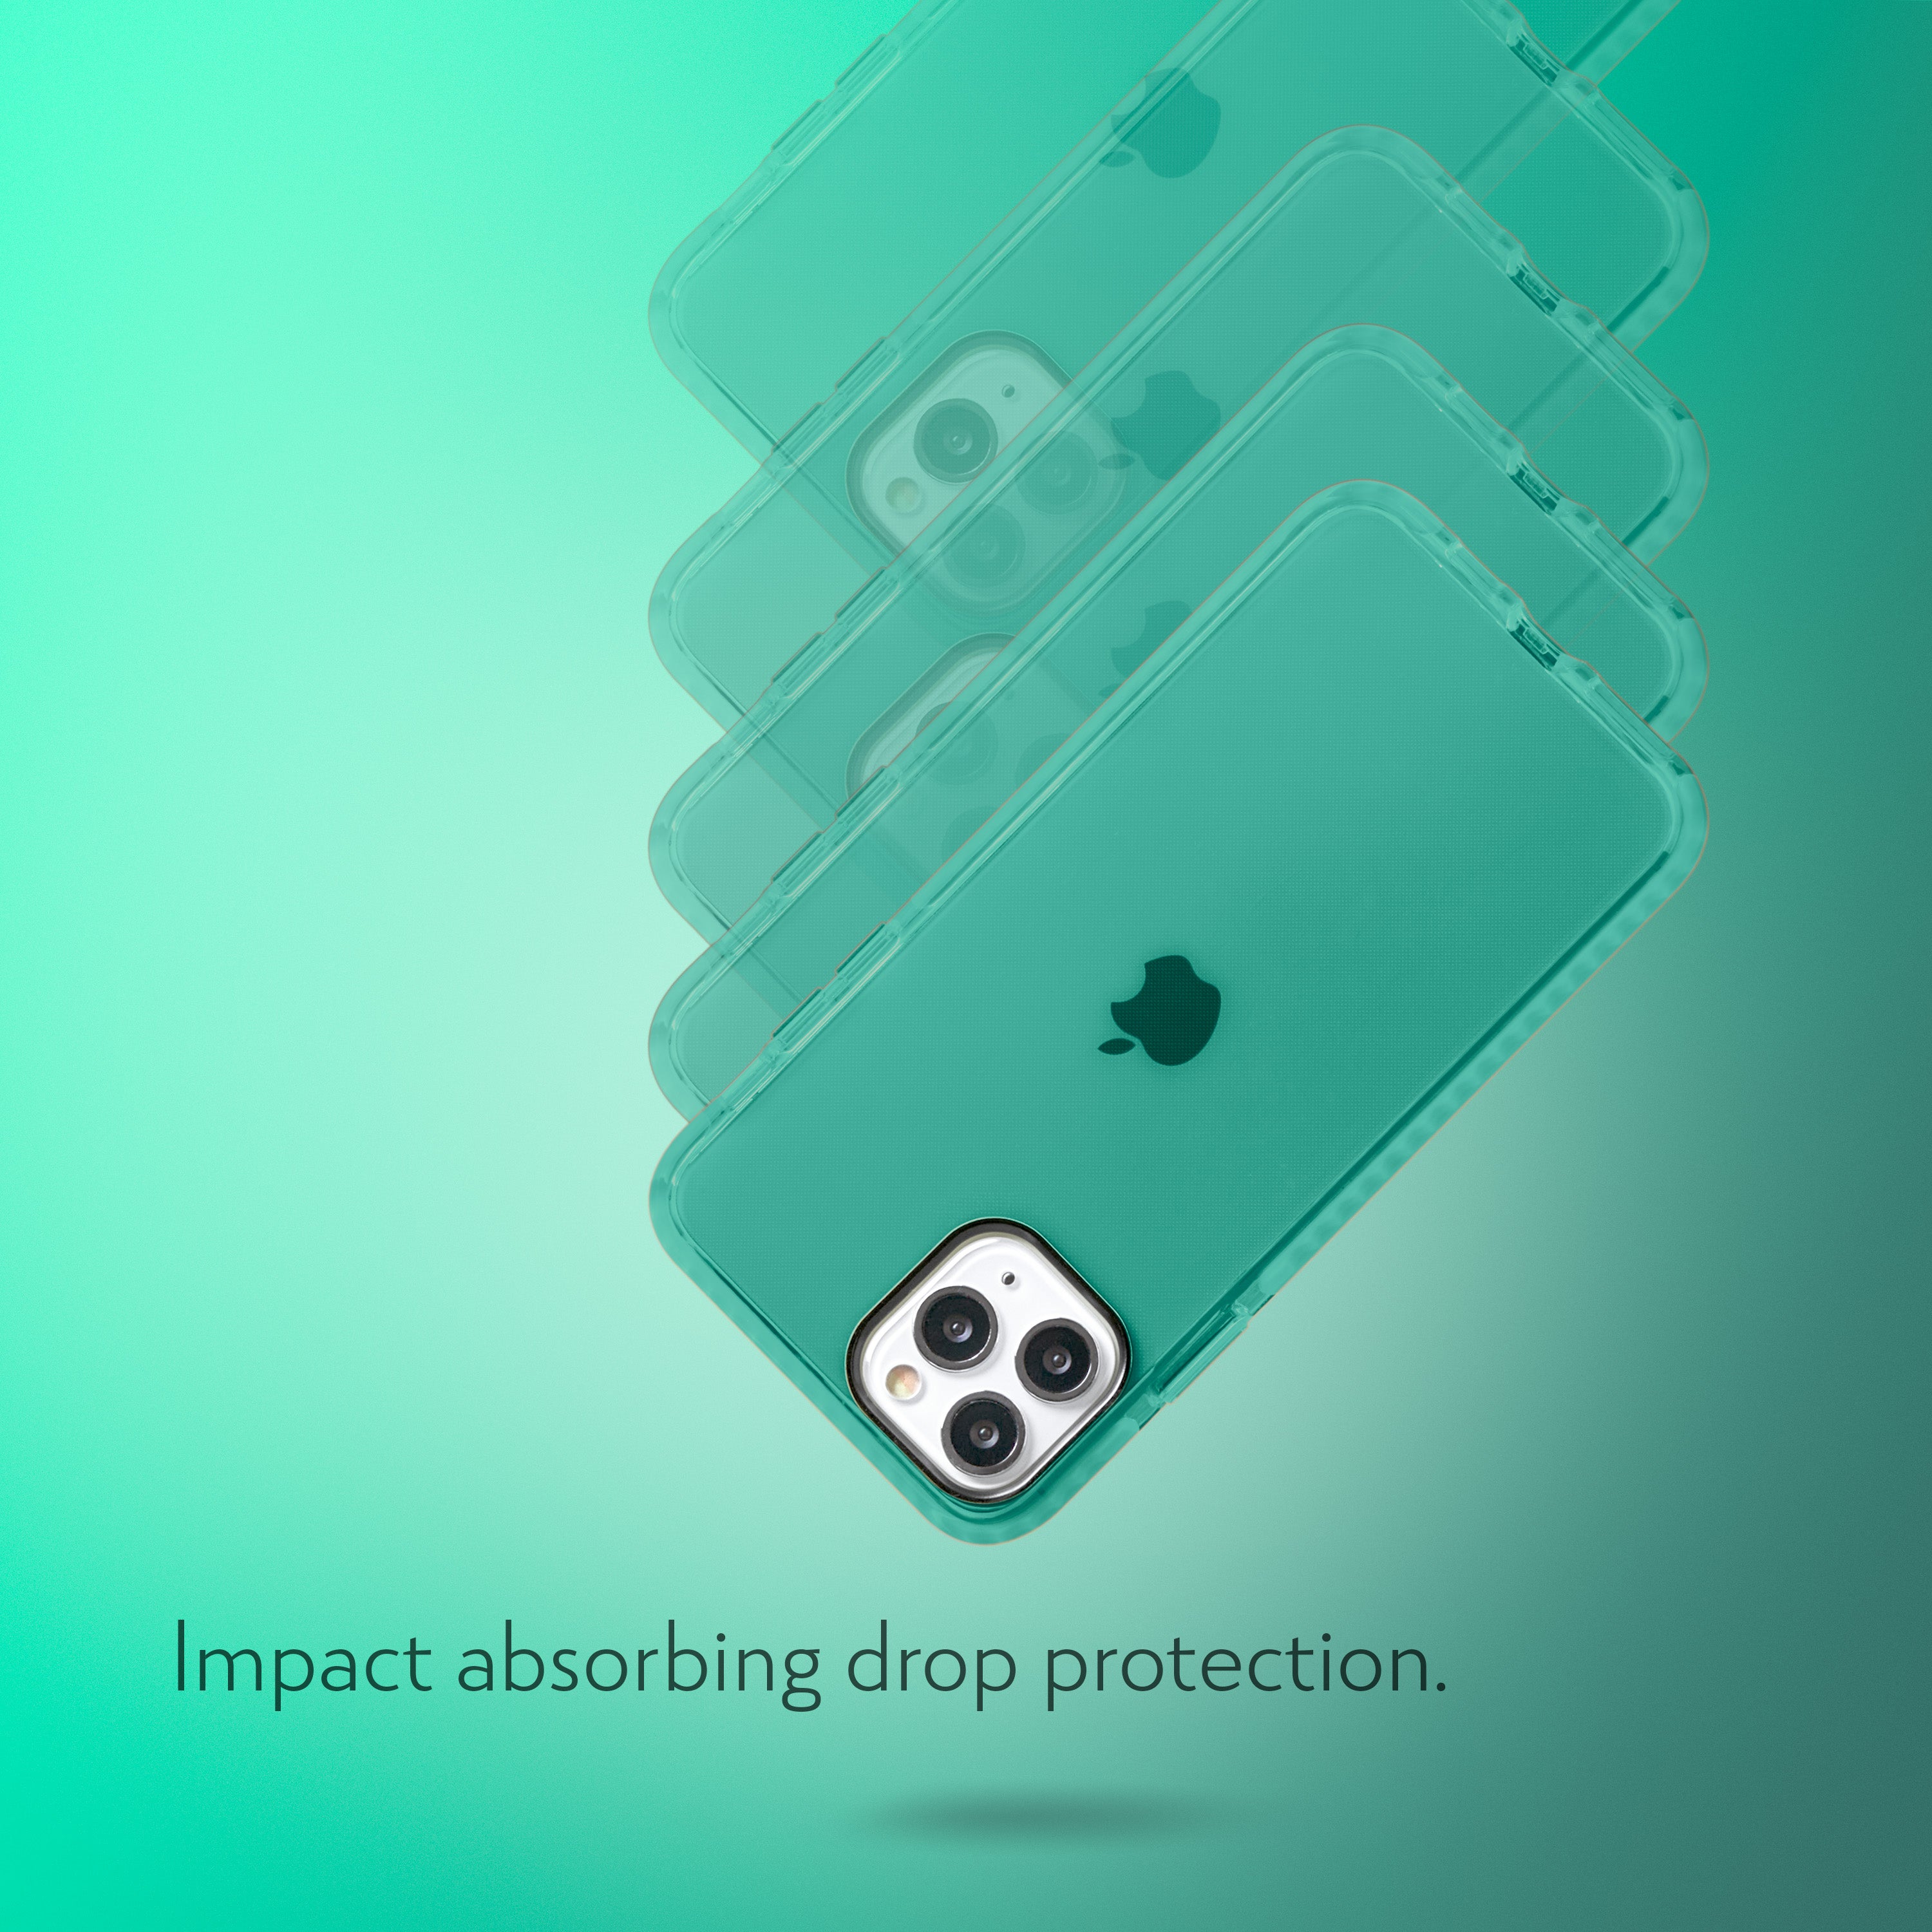 Barrier Case for iPhone 12 and 12 Pro - Polished Turquoise Blue